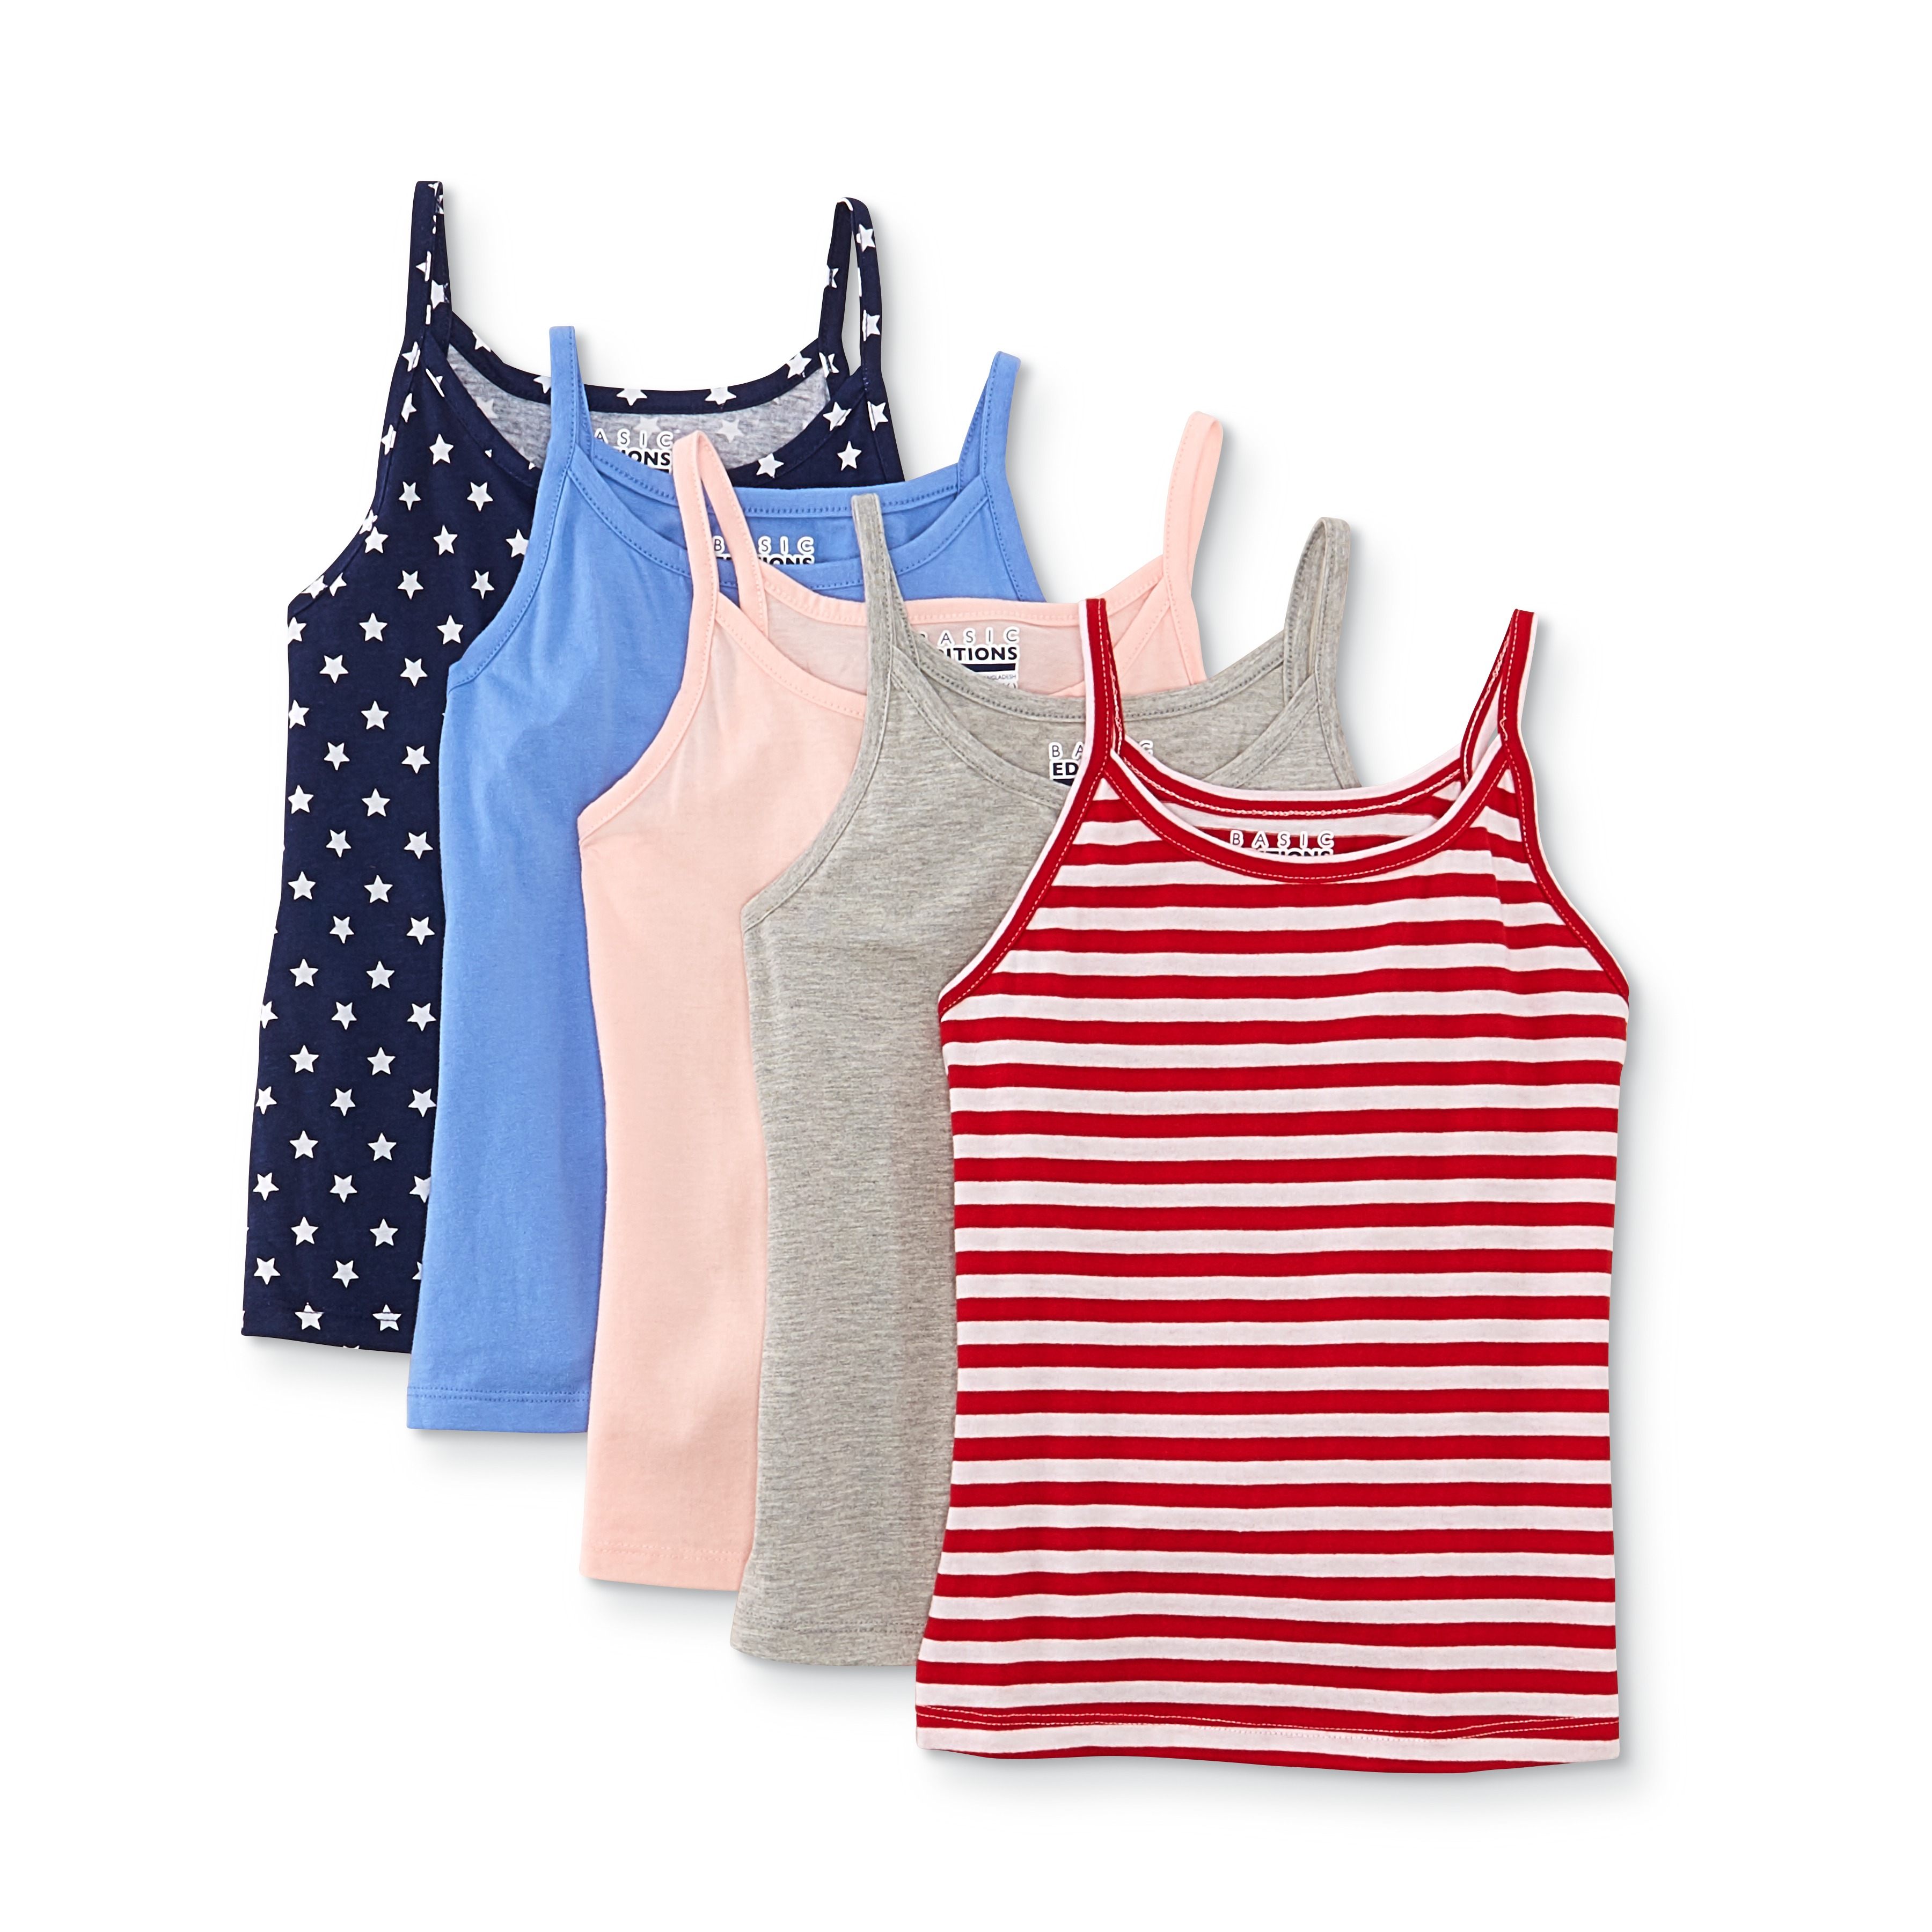 Basic Editions Girls' Plus 5-Pack Tank Tops - Assorted